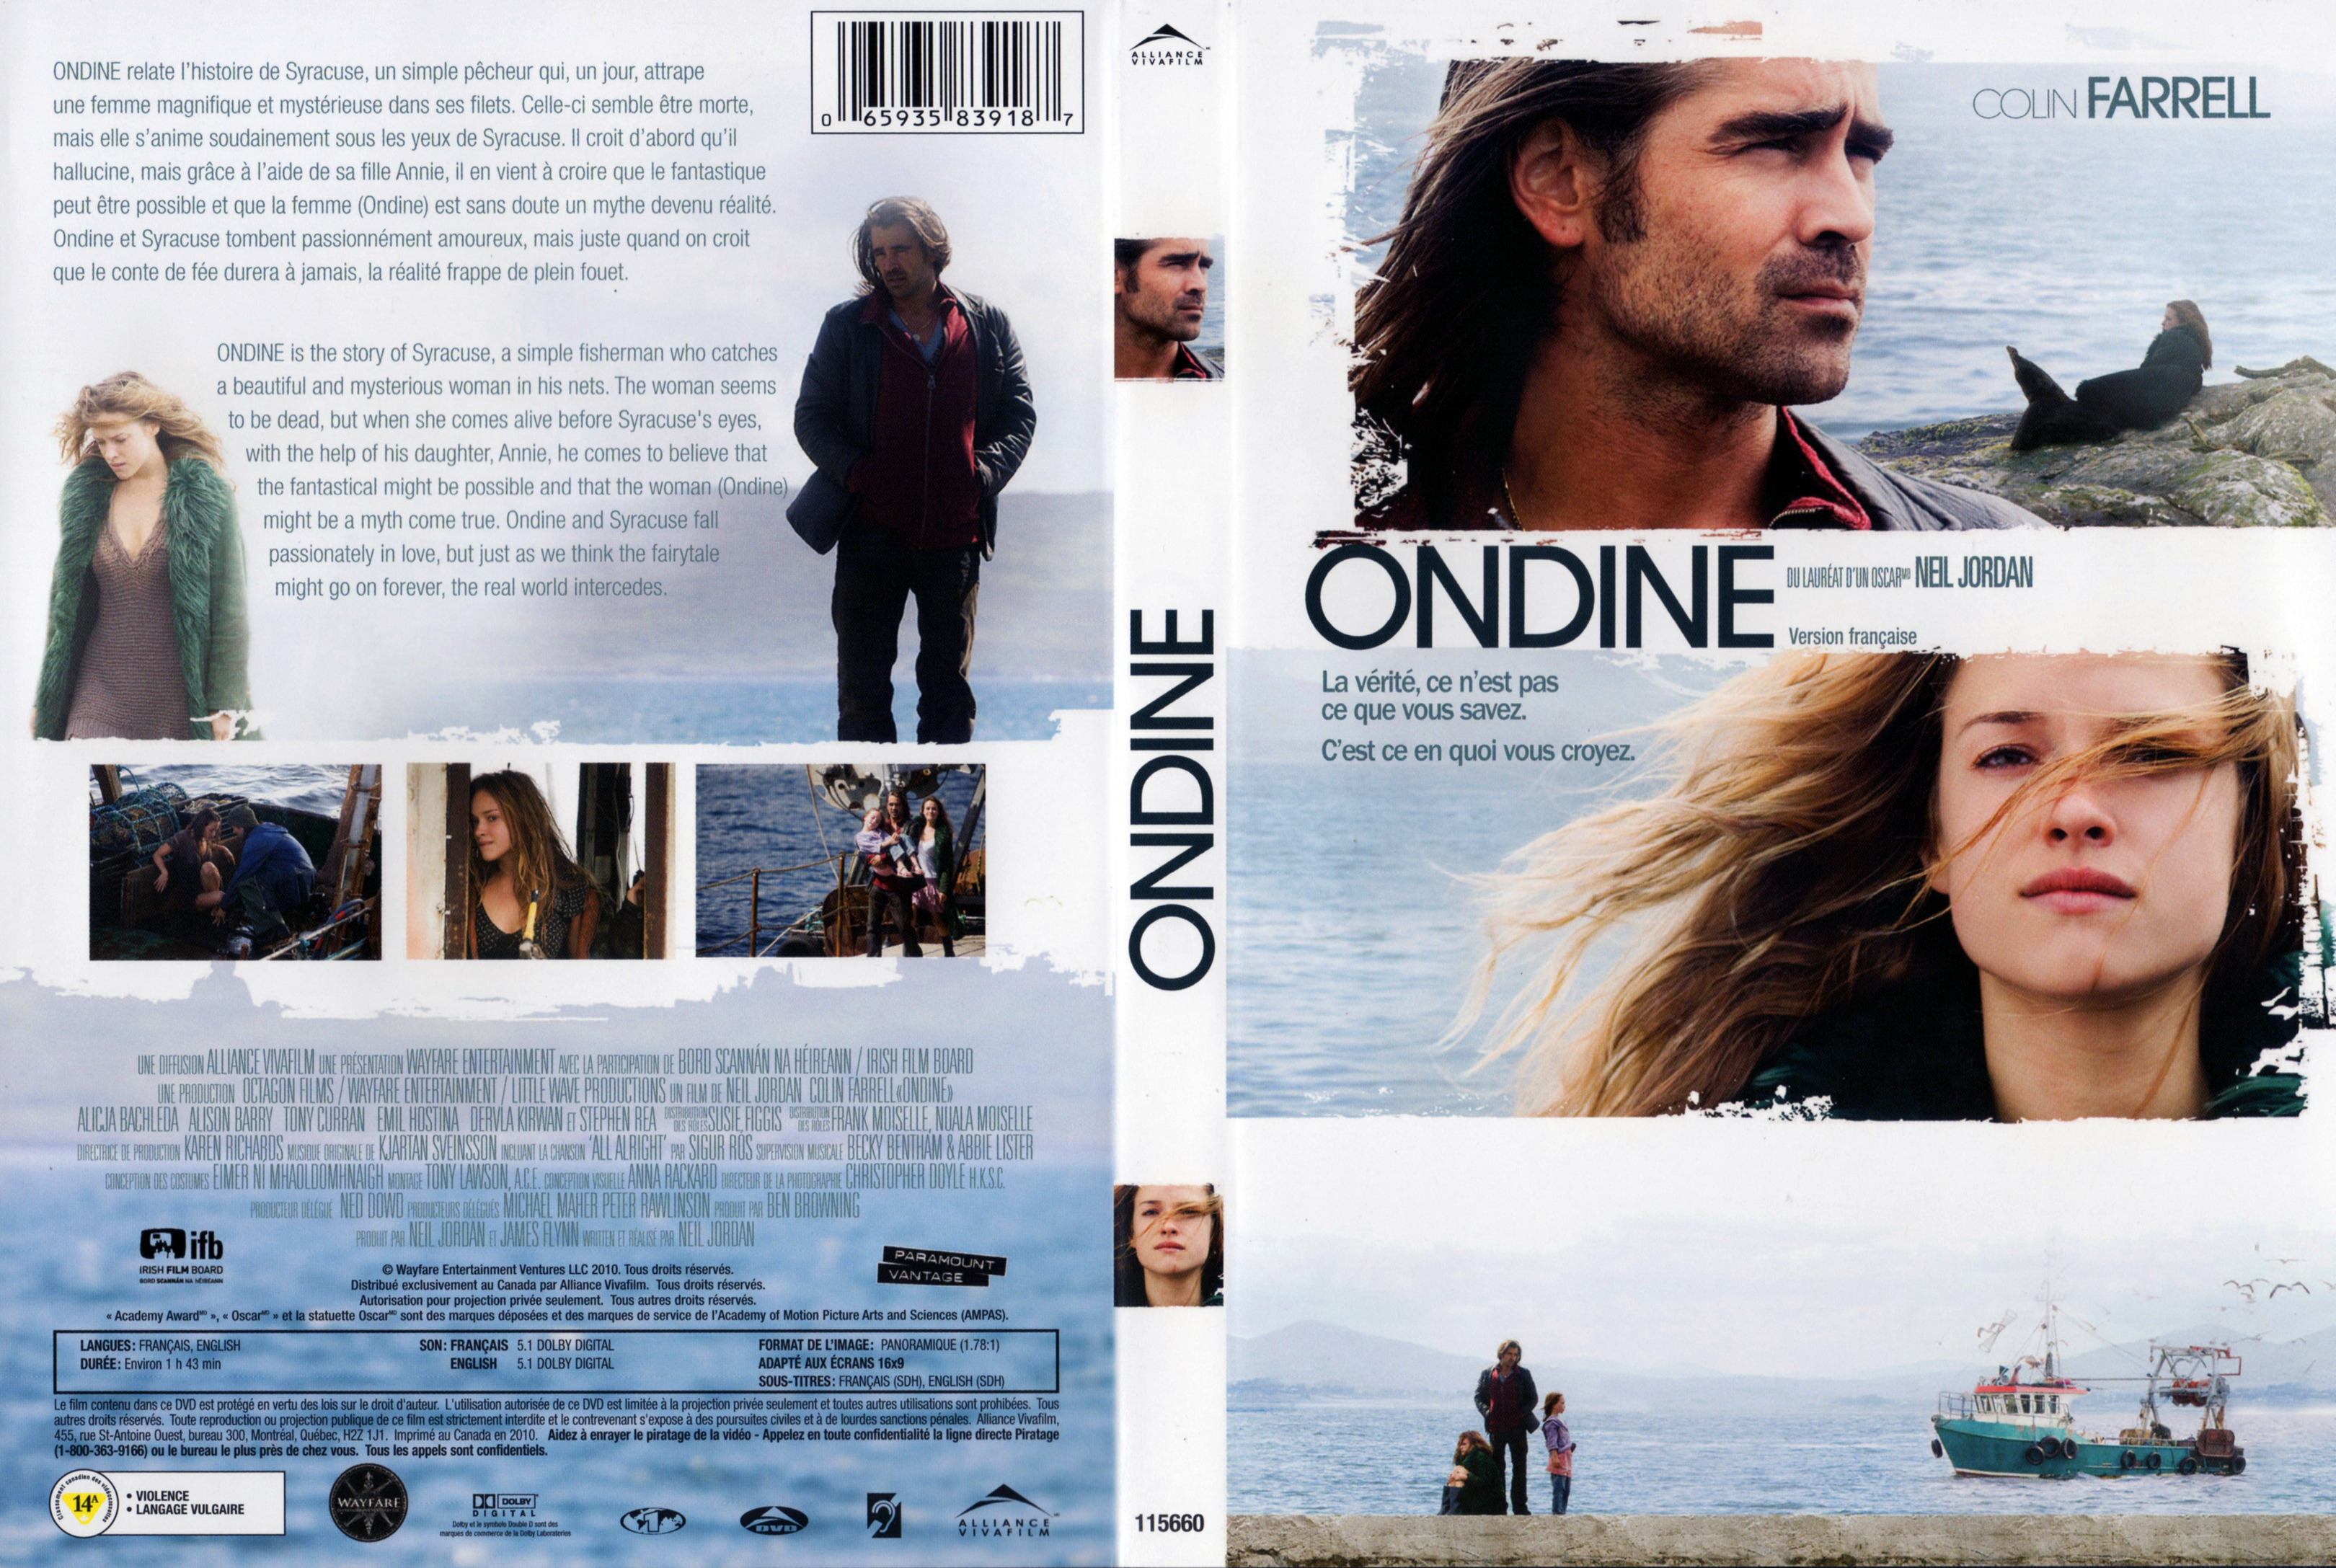 Jaquette DVD Ondine (Canadienne) v2